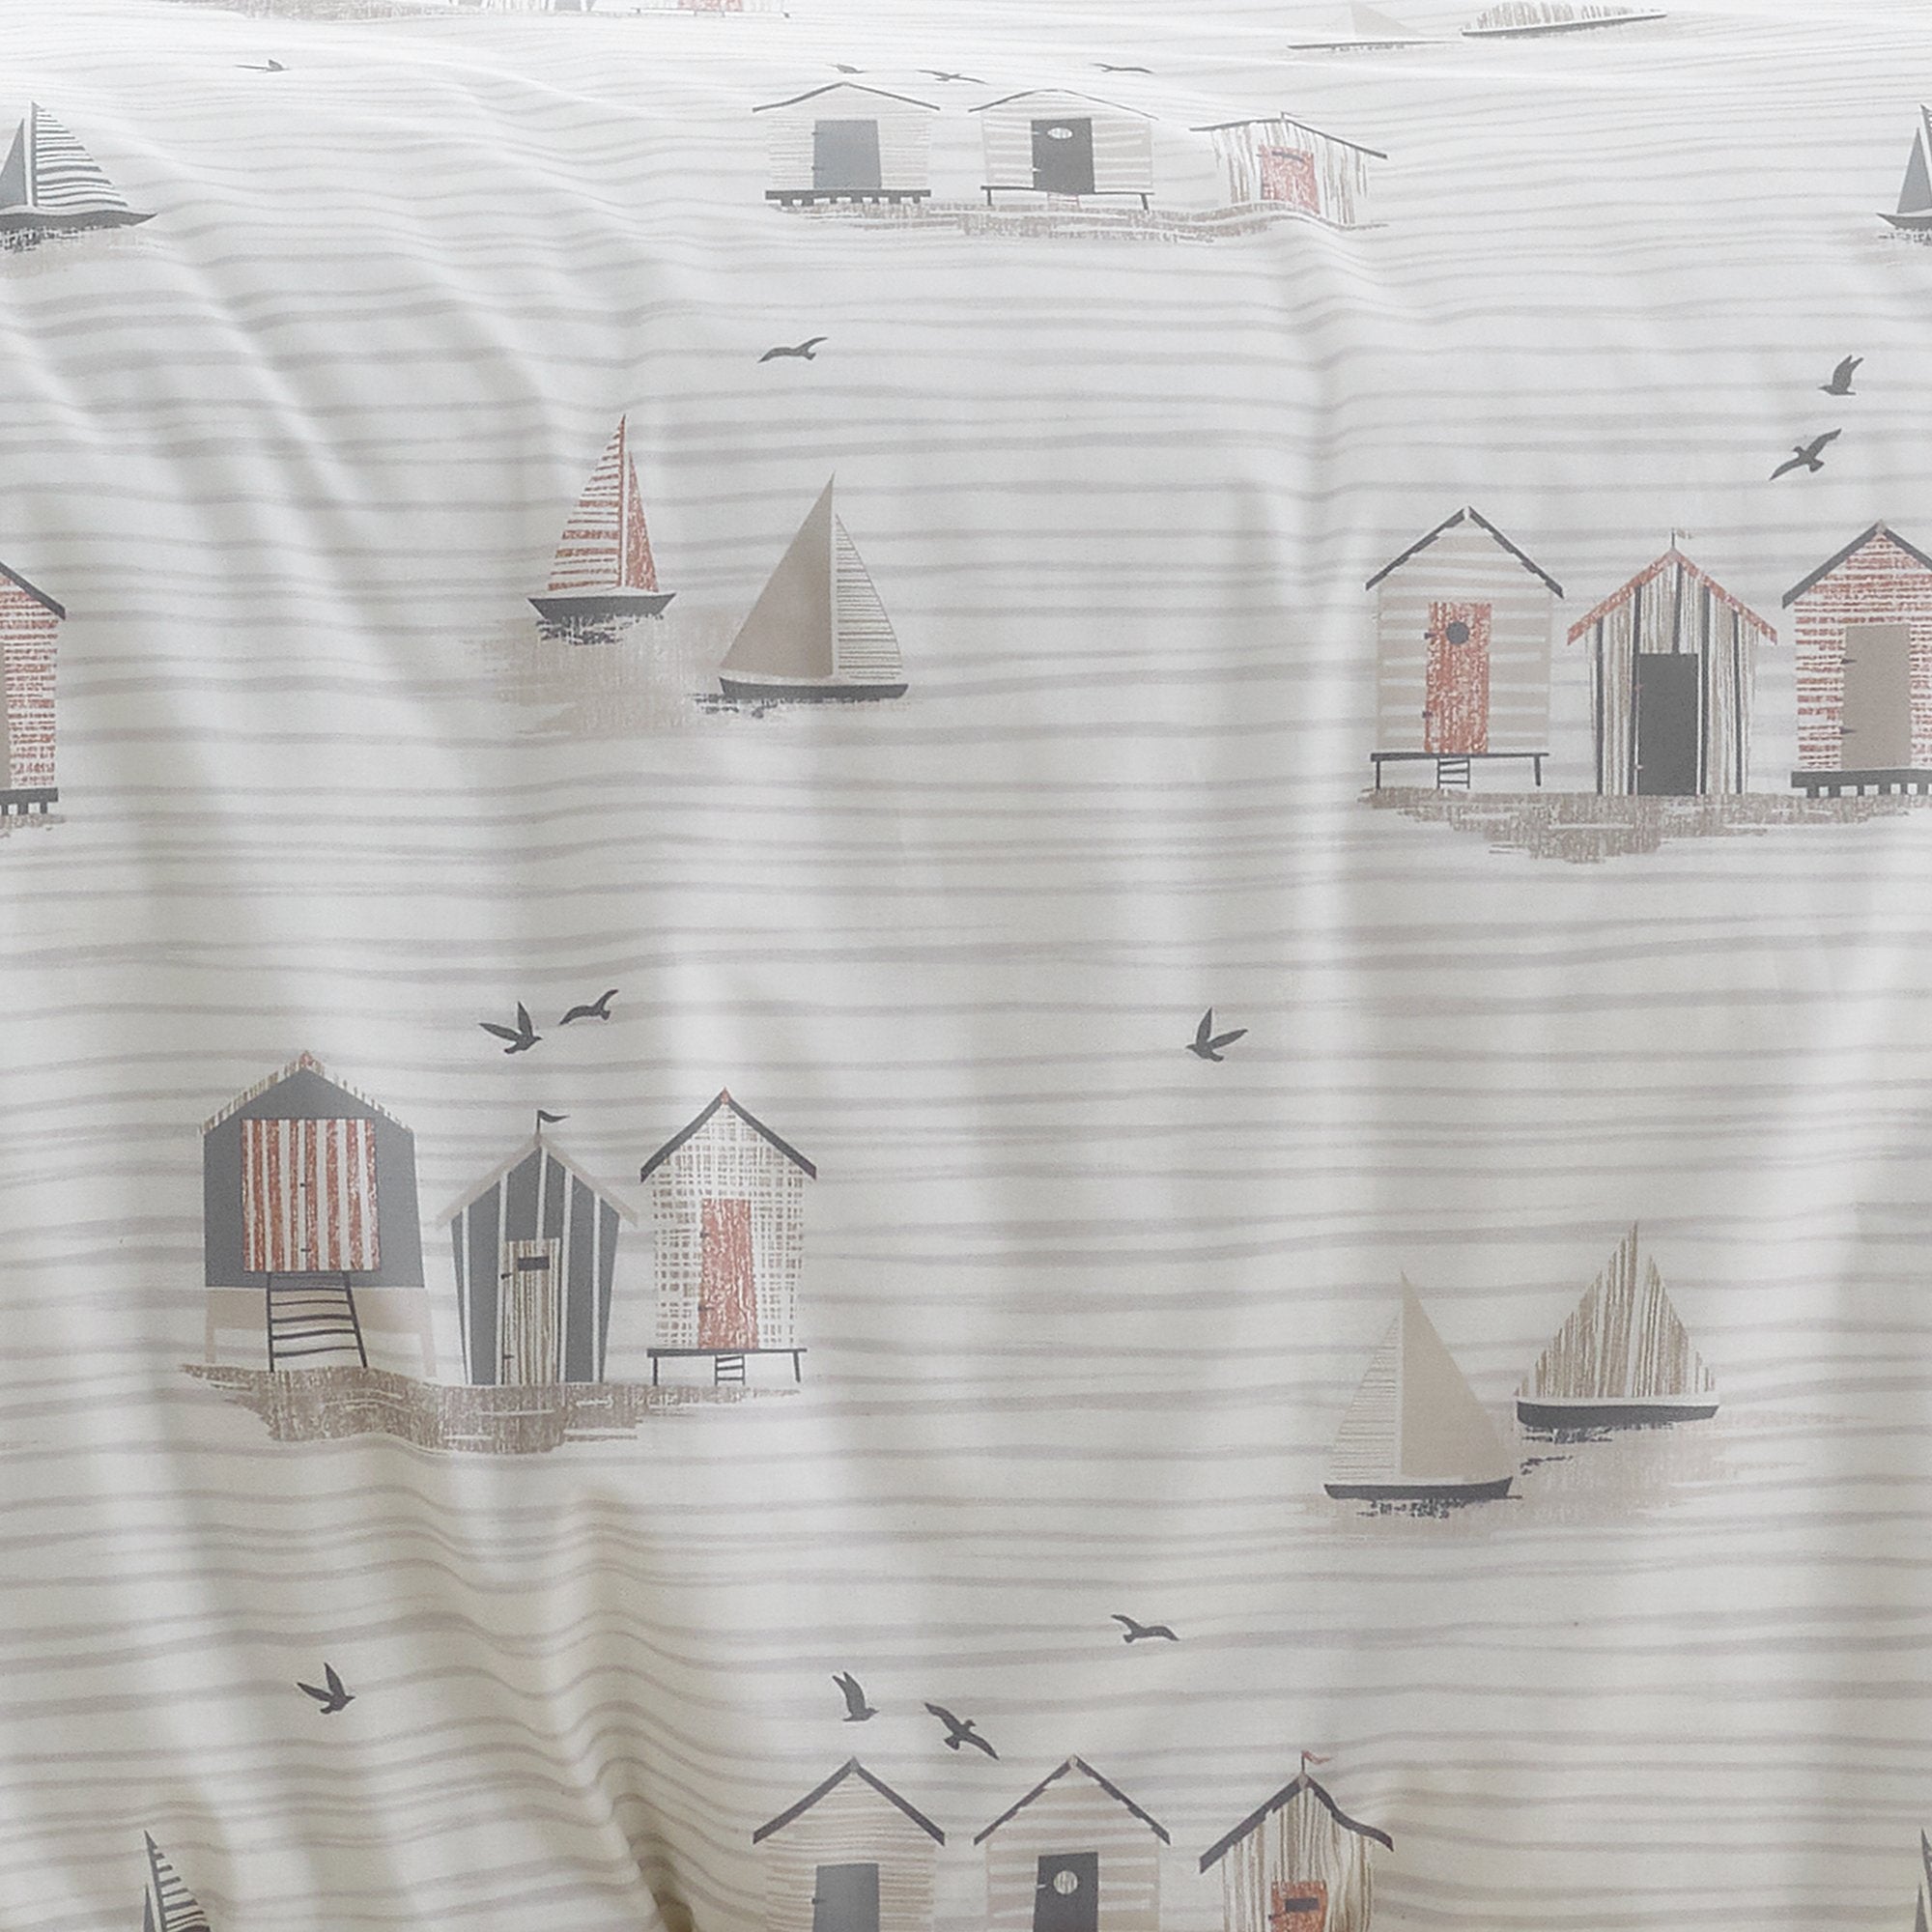 Duvet Cover Set Beach Huts by Fusion in Natural